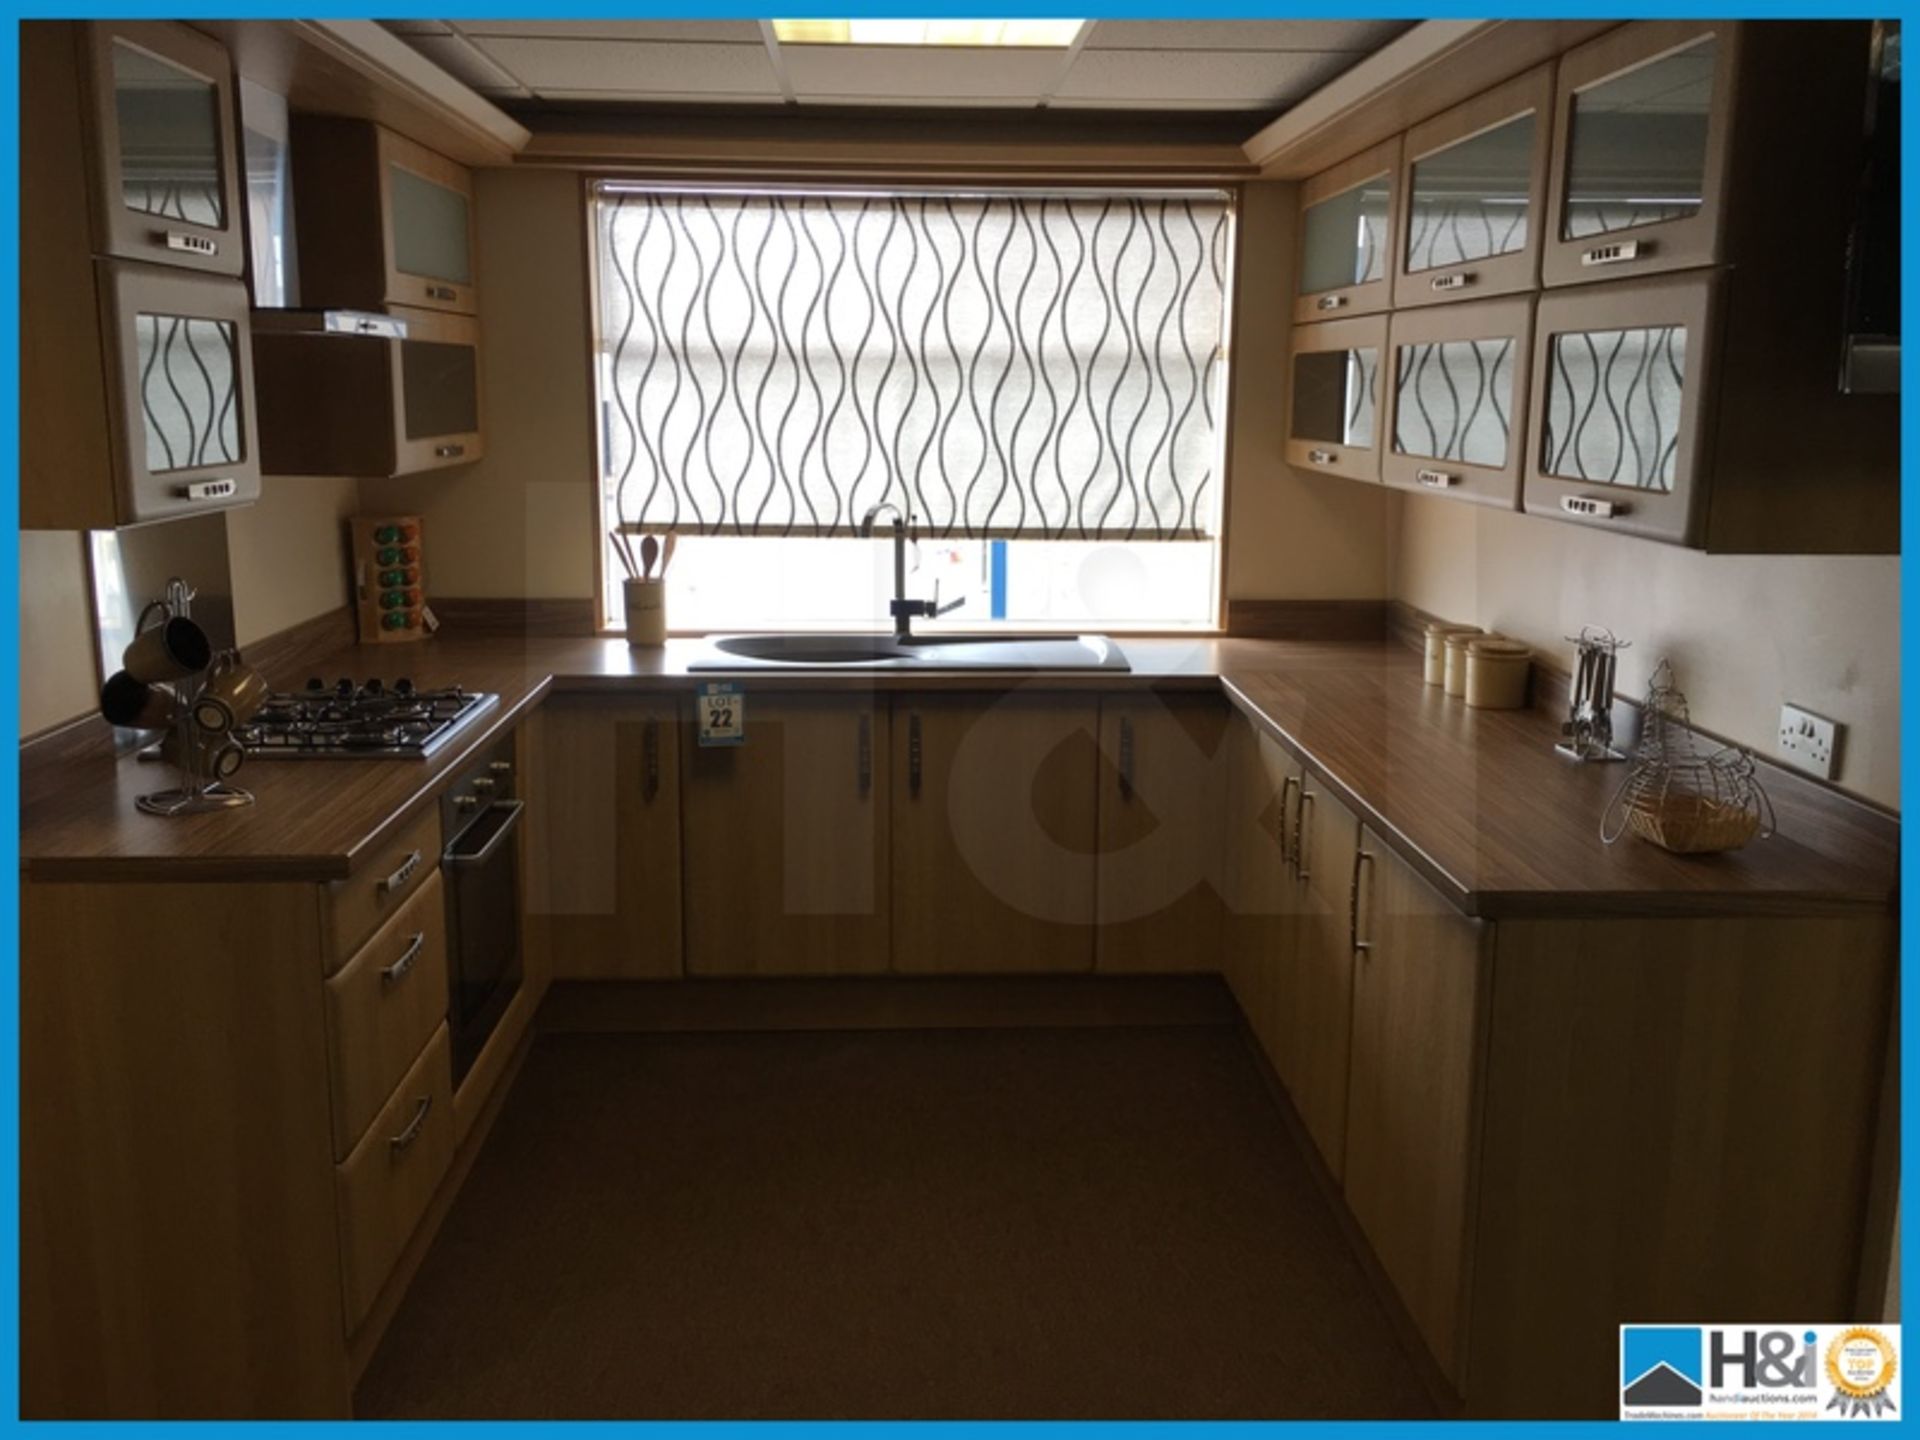 Stunning contemporary design display kitchen finished in Oak with matching worktop. Come with